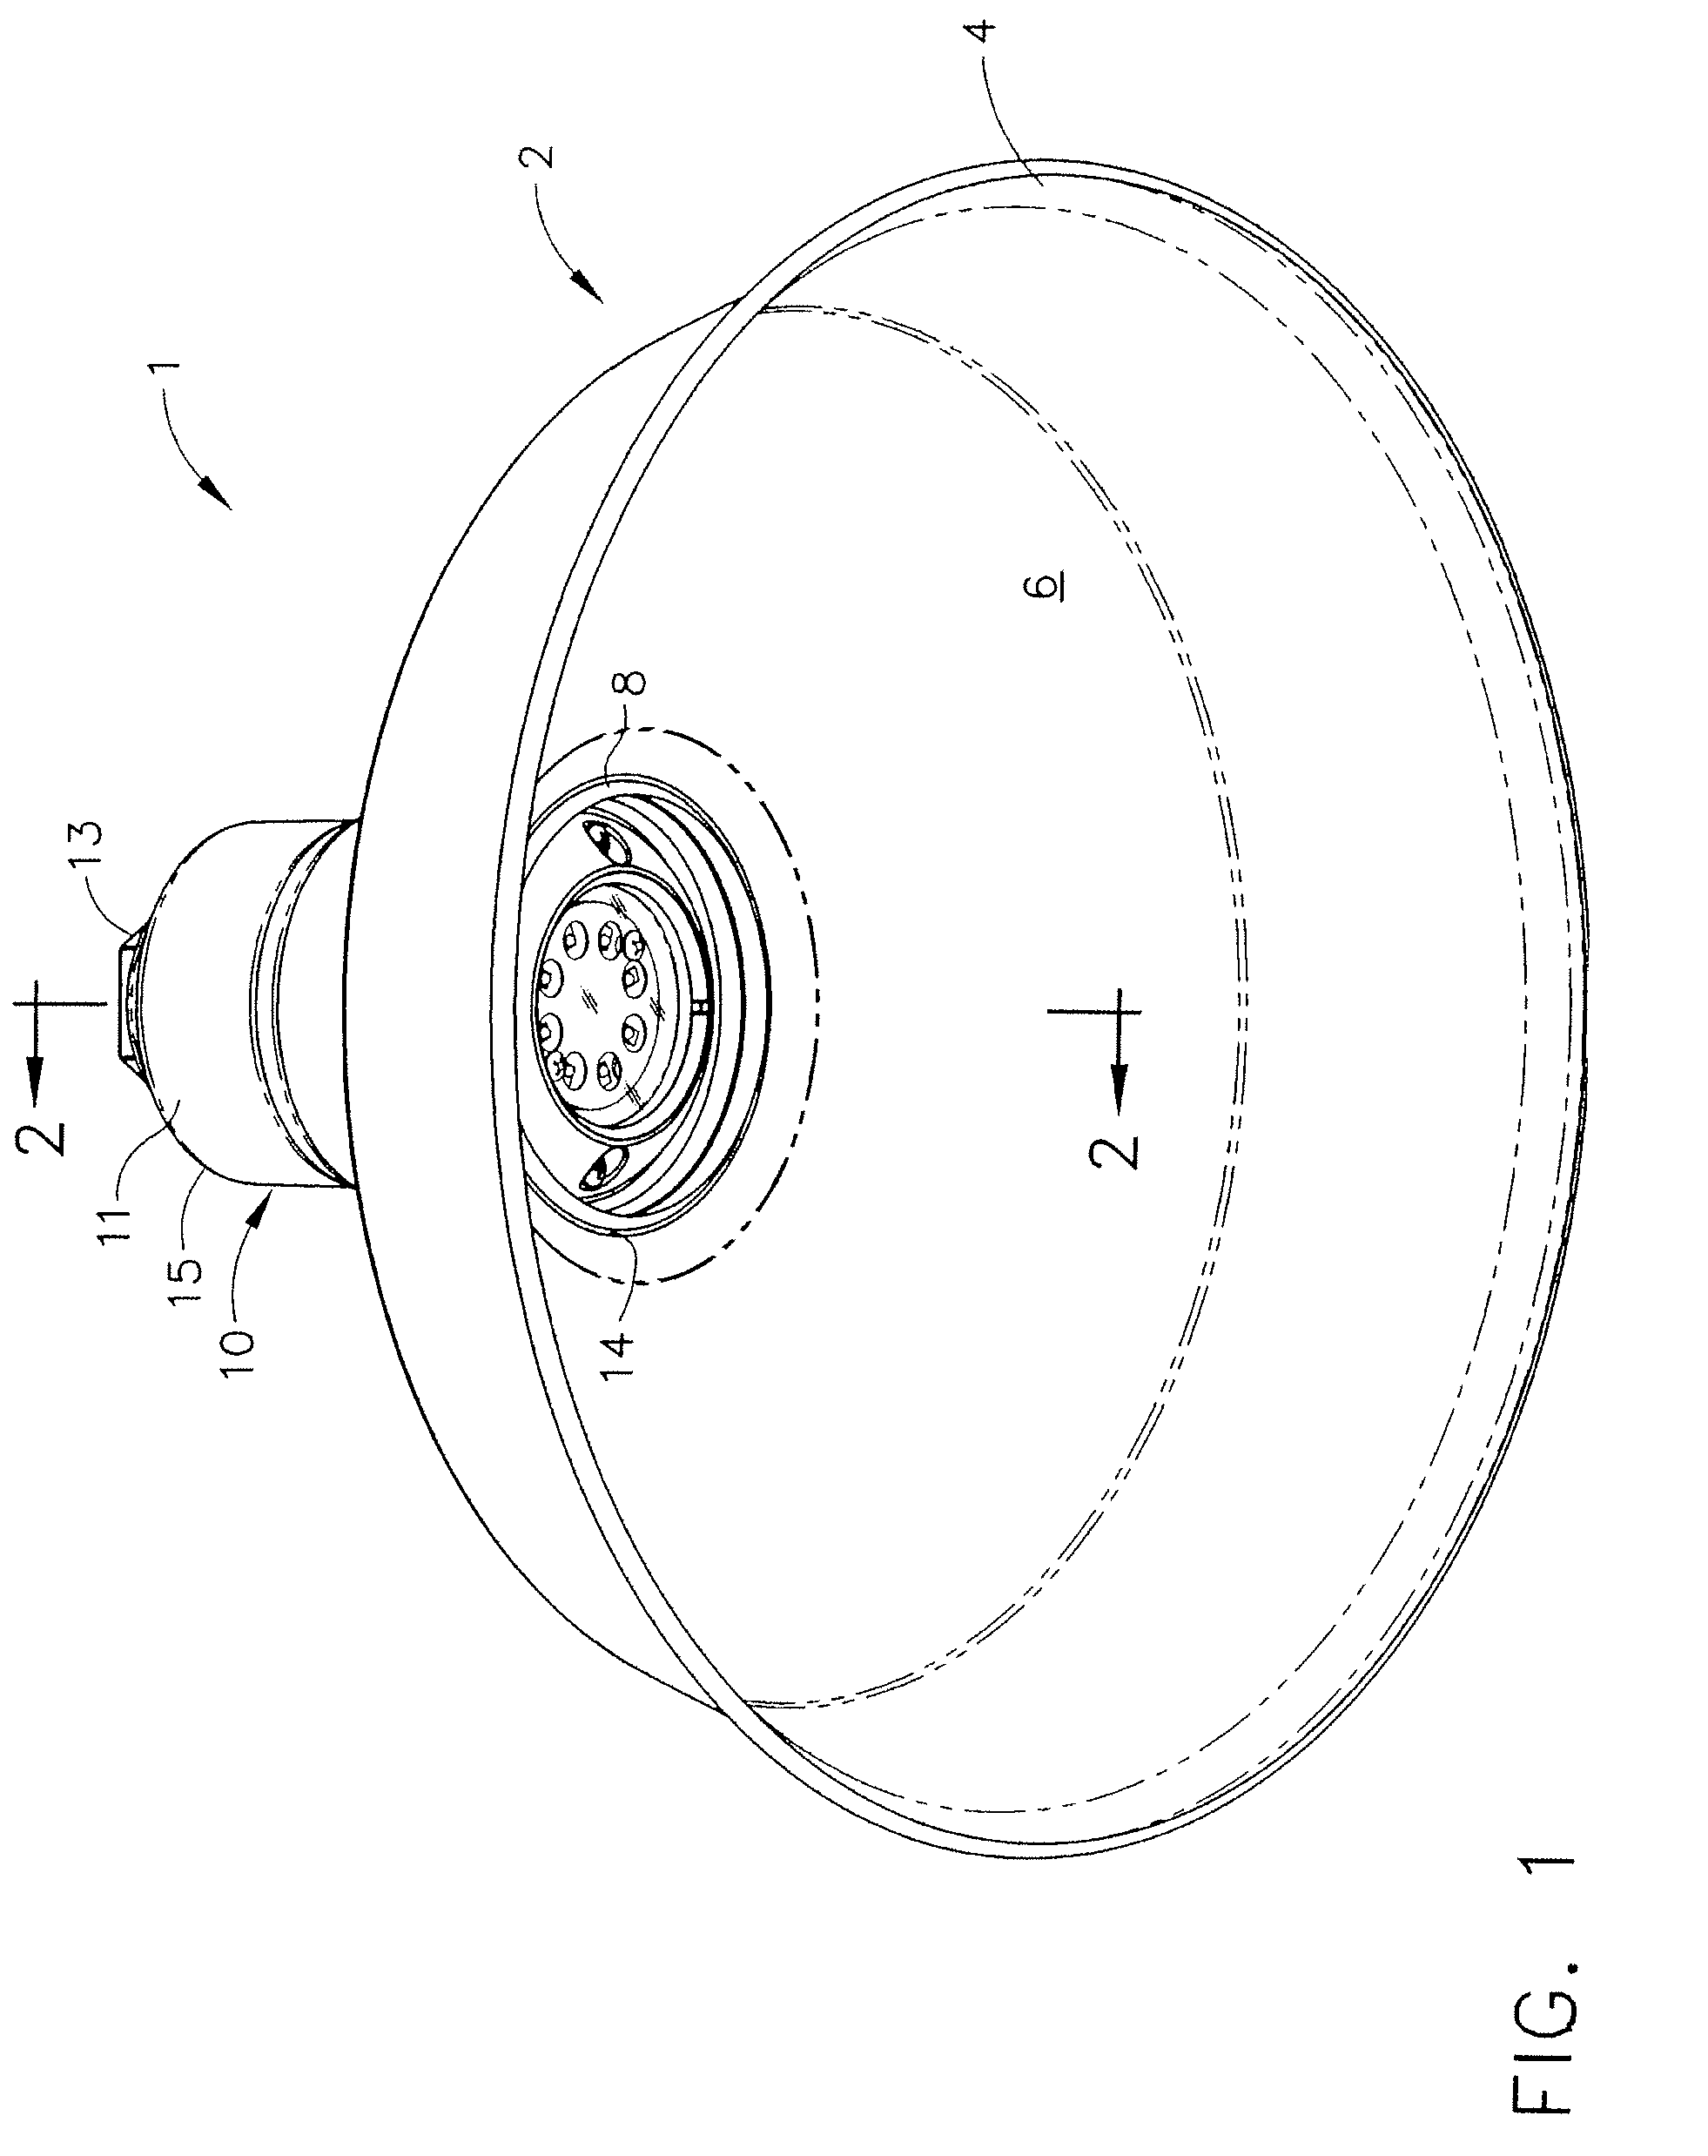 LED lamp device and method to retrofit a lighting fixture